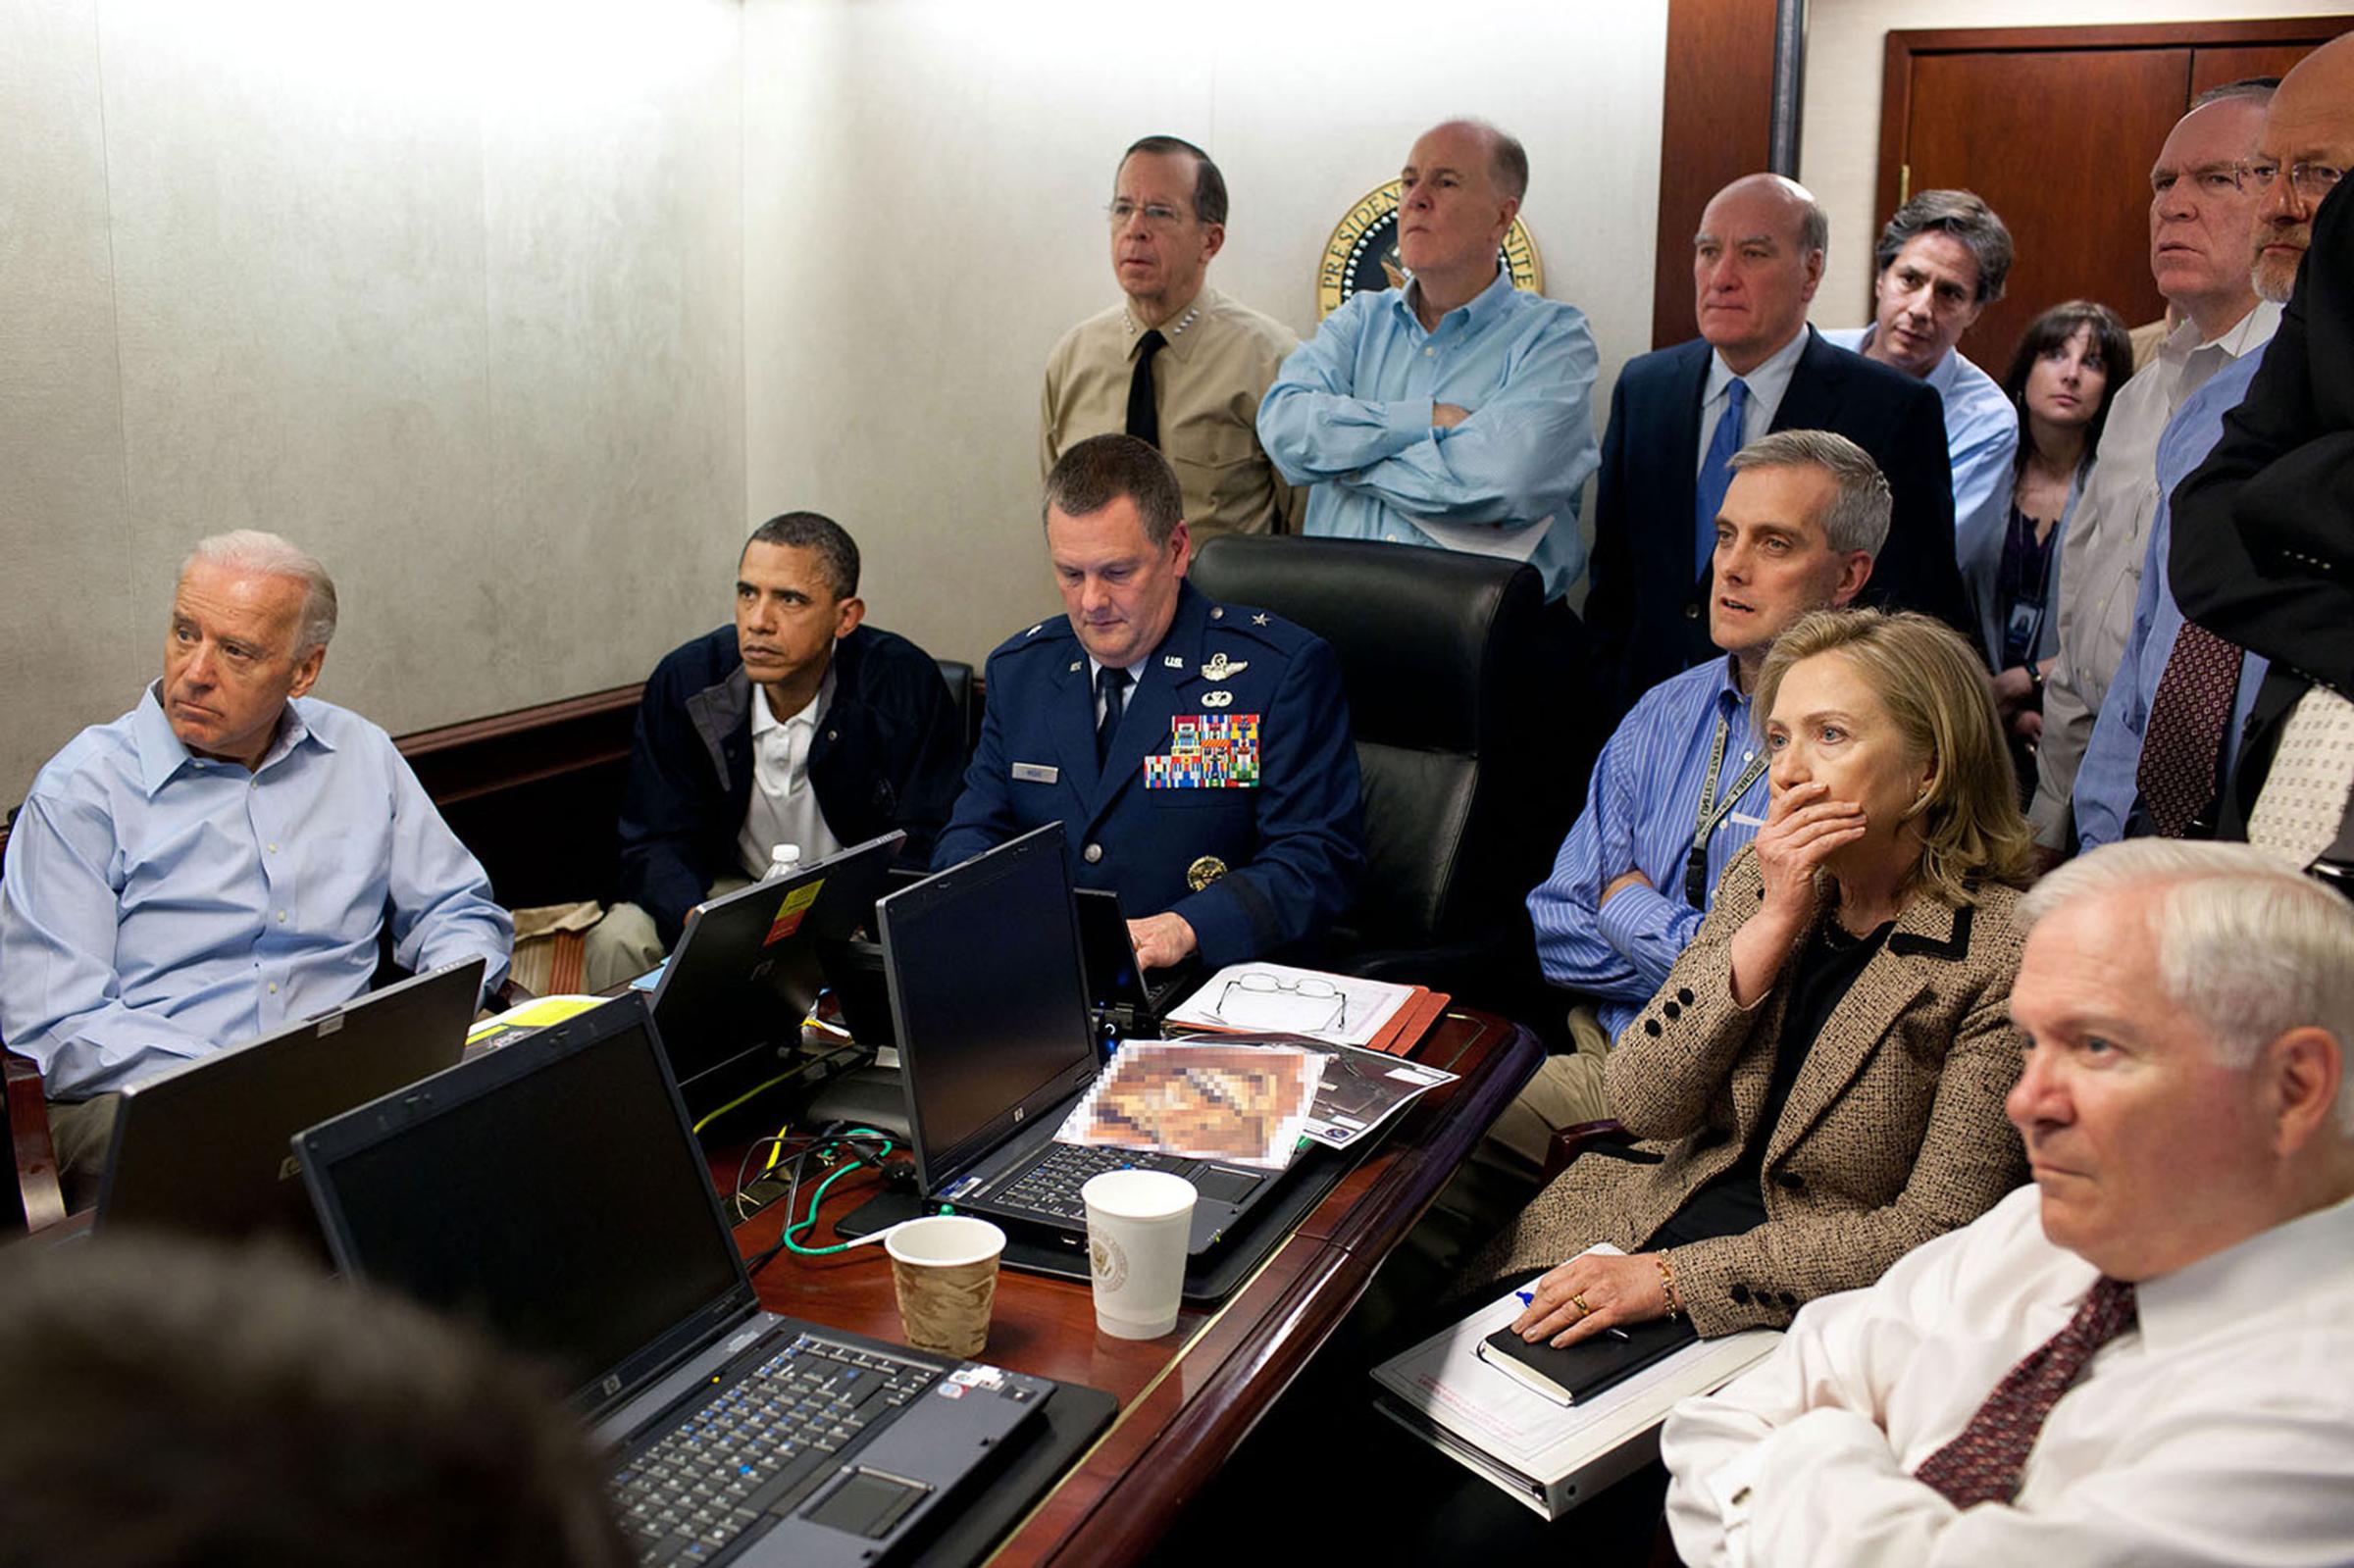 "Much has been made of this photograph that shows the President and Vice President and the national security team monitoring in real time the mission against Osama bin Laden, May 1, 2011. Some more background on the photograph: The White House Situation Room is actually comprised of several different conference rooms. The majority of the time, the President convenes meetings in the large conference room with assigned seats. But to monitor this mission, the group moved into the much smaller conference room. The President chose to sit next to Brigadier General Marshall B. "Brad" Webb, Assistant Commanding General of Joint Special Operations Command, who was point man for the communications taking place. With so few chairs, others just stood at the back of the room. I was jammed into a corner of the room with no room to move. During the mission itself, I made approximately 100 photographs, almost all from this cramped spot in the corner. Please note: a classified document seen in front of Sec. Clinton has been obscured."